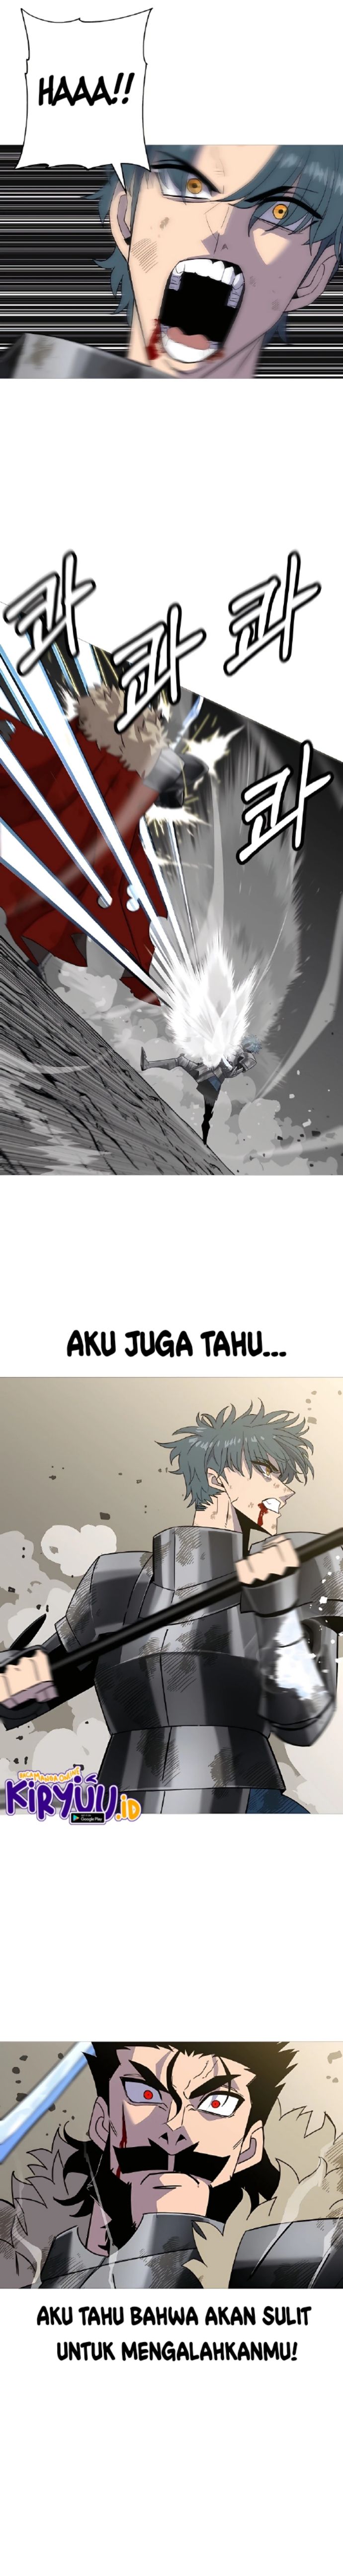 Dilarang COPAS - situs resmi www.mangacanblog.com - Komik the story of a low rank soldier becoming a monarch 094 - chapter 94 95 Indonesia the story of a low rank soldier becoming a monarch 094 - chapter 94 Terbaru 7|Baca Manga Komik Indonesia|Mangacan